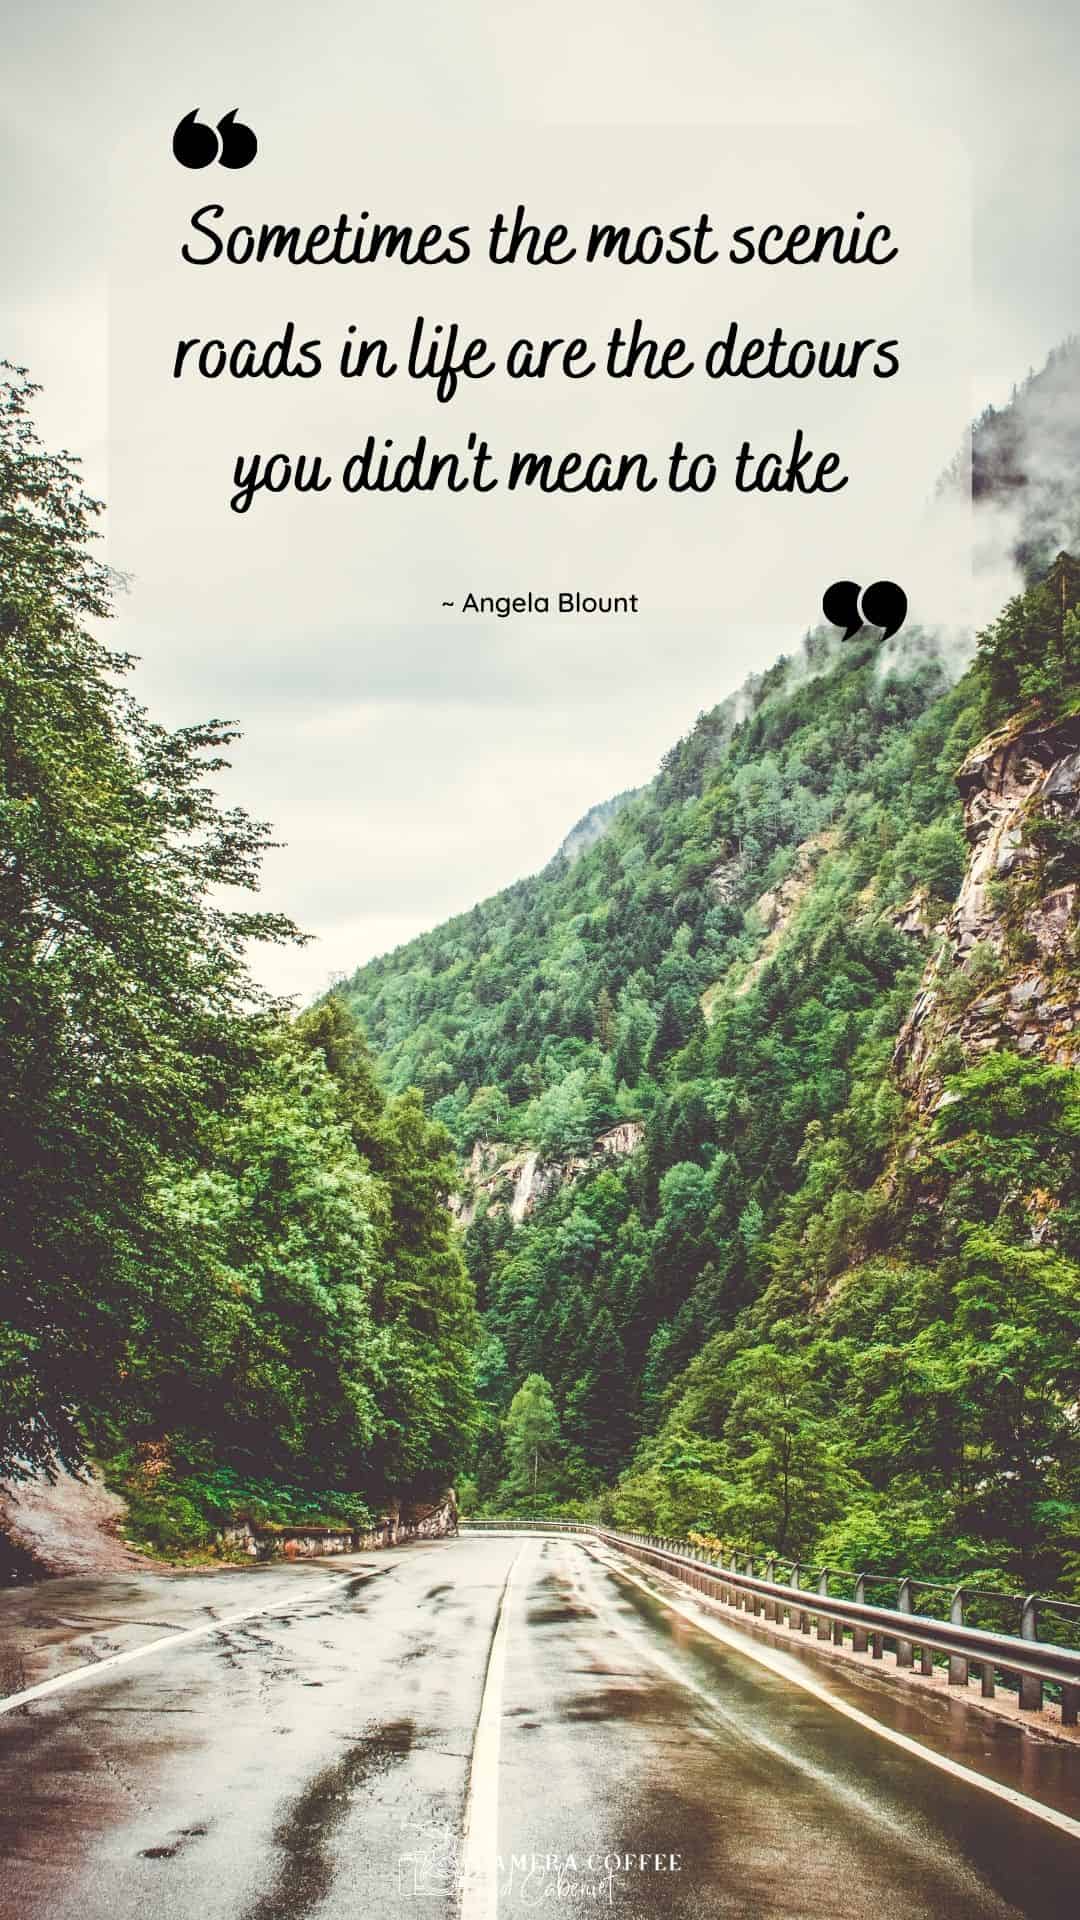 The Best Road Trip Quotes - Funny And Inspiring - Camera Coffee and ...